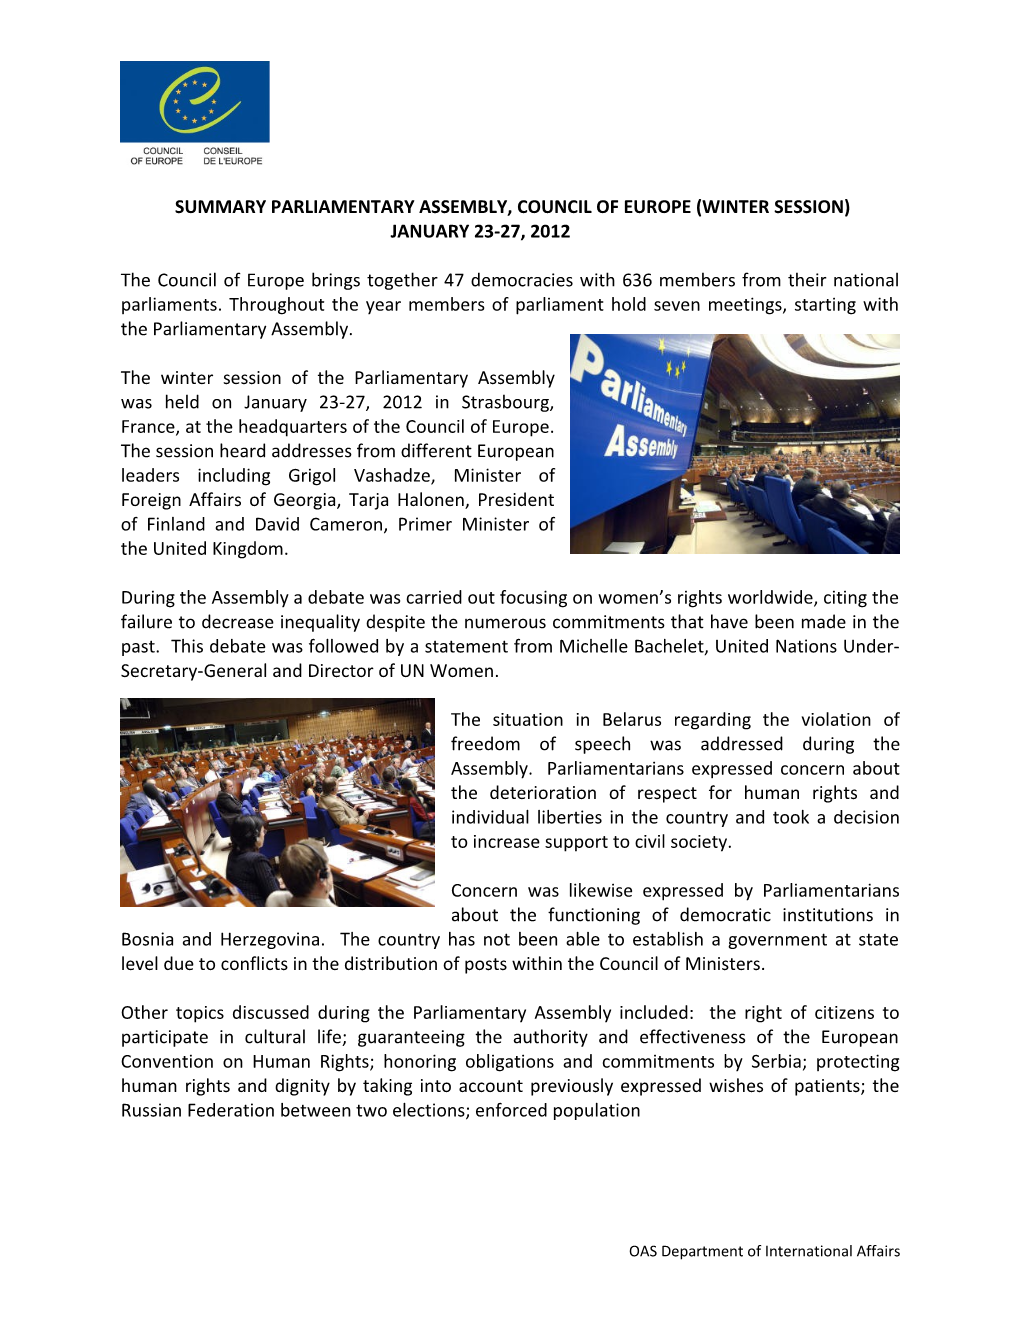 Summary Parliamentary Assembly, Council of Europe (Winter Session)